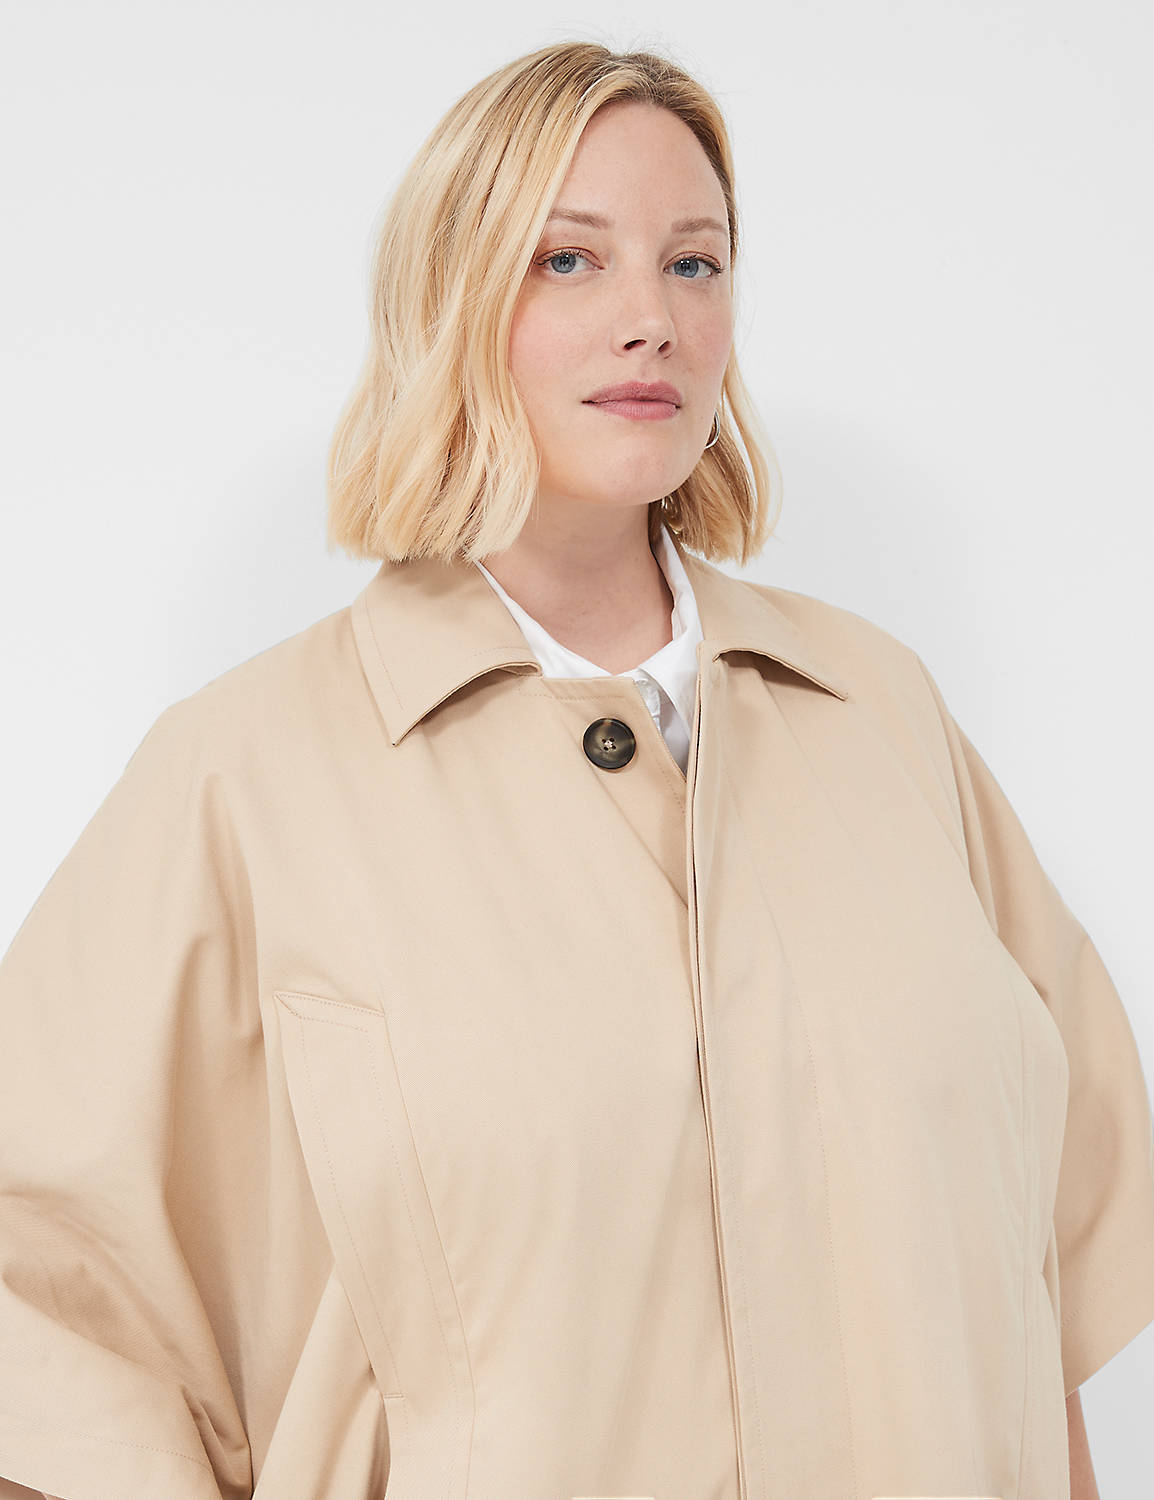 Trench Cape 1138996 Product Image 3